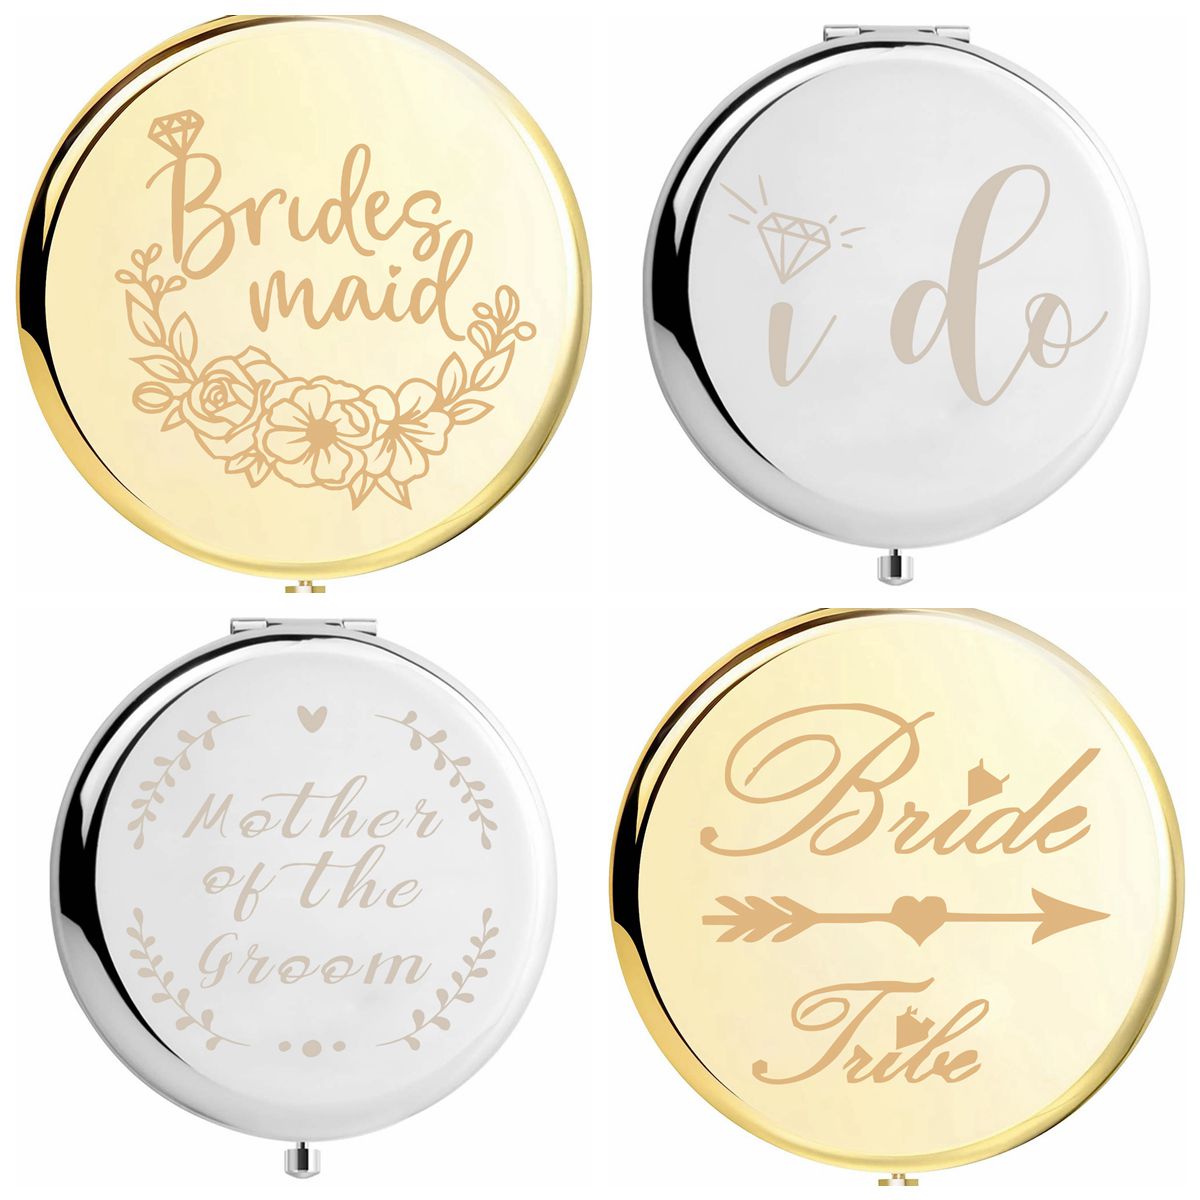  Maid of Honor Gift,Compact Crystal Pocket Makeup  Mirrors,Initial Monogram Letter J Mirror And Love Knot Bracelets for  Bachelorette Party Bridesmaid Proposal Gifts ,Wedding Party Gifts.  (Champagne J) : Beauty & Personal